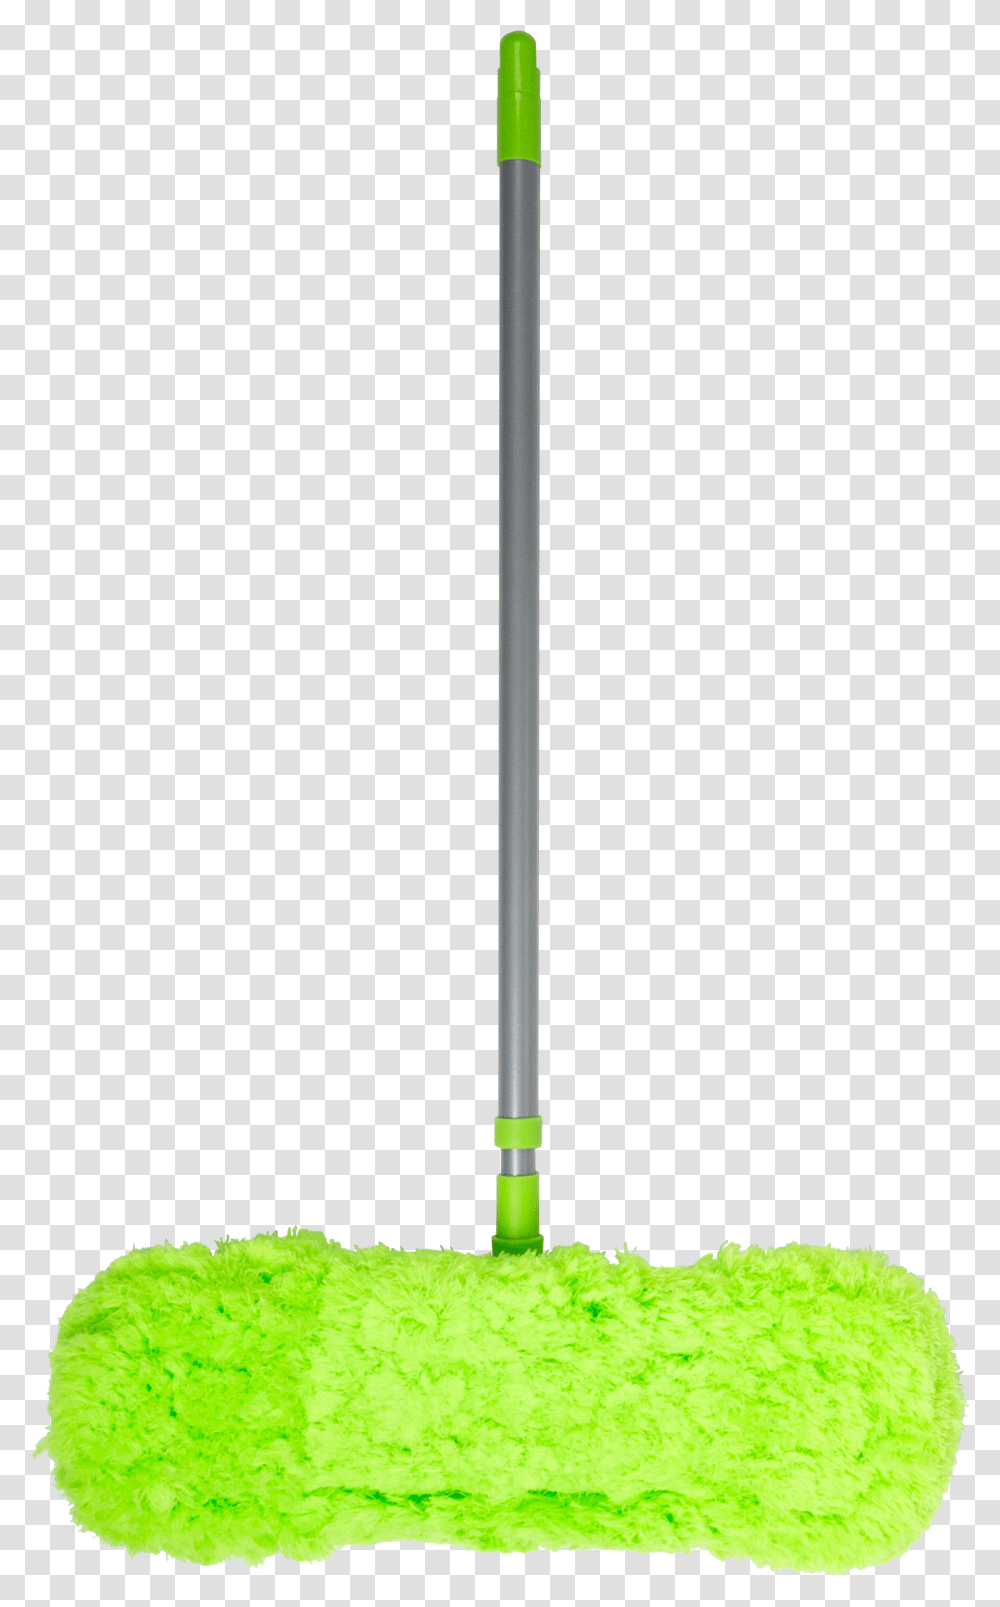 Shine Deluxe Microfibre Feather Flat Mop Silverlime Miniature Golf, Broom Transparent Png